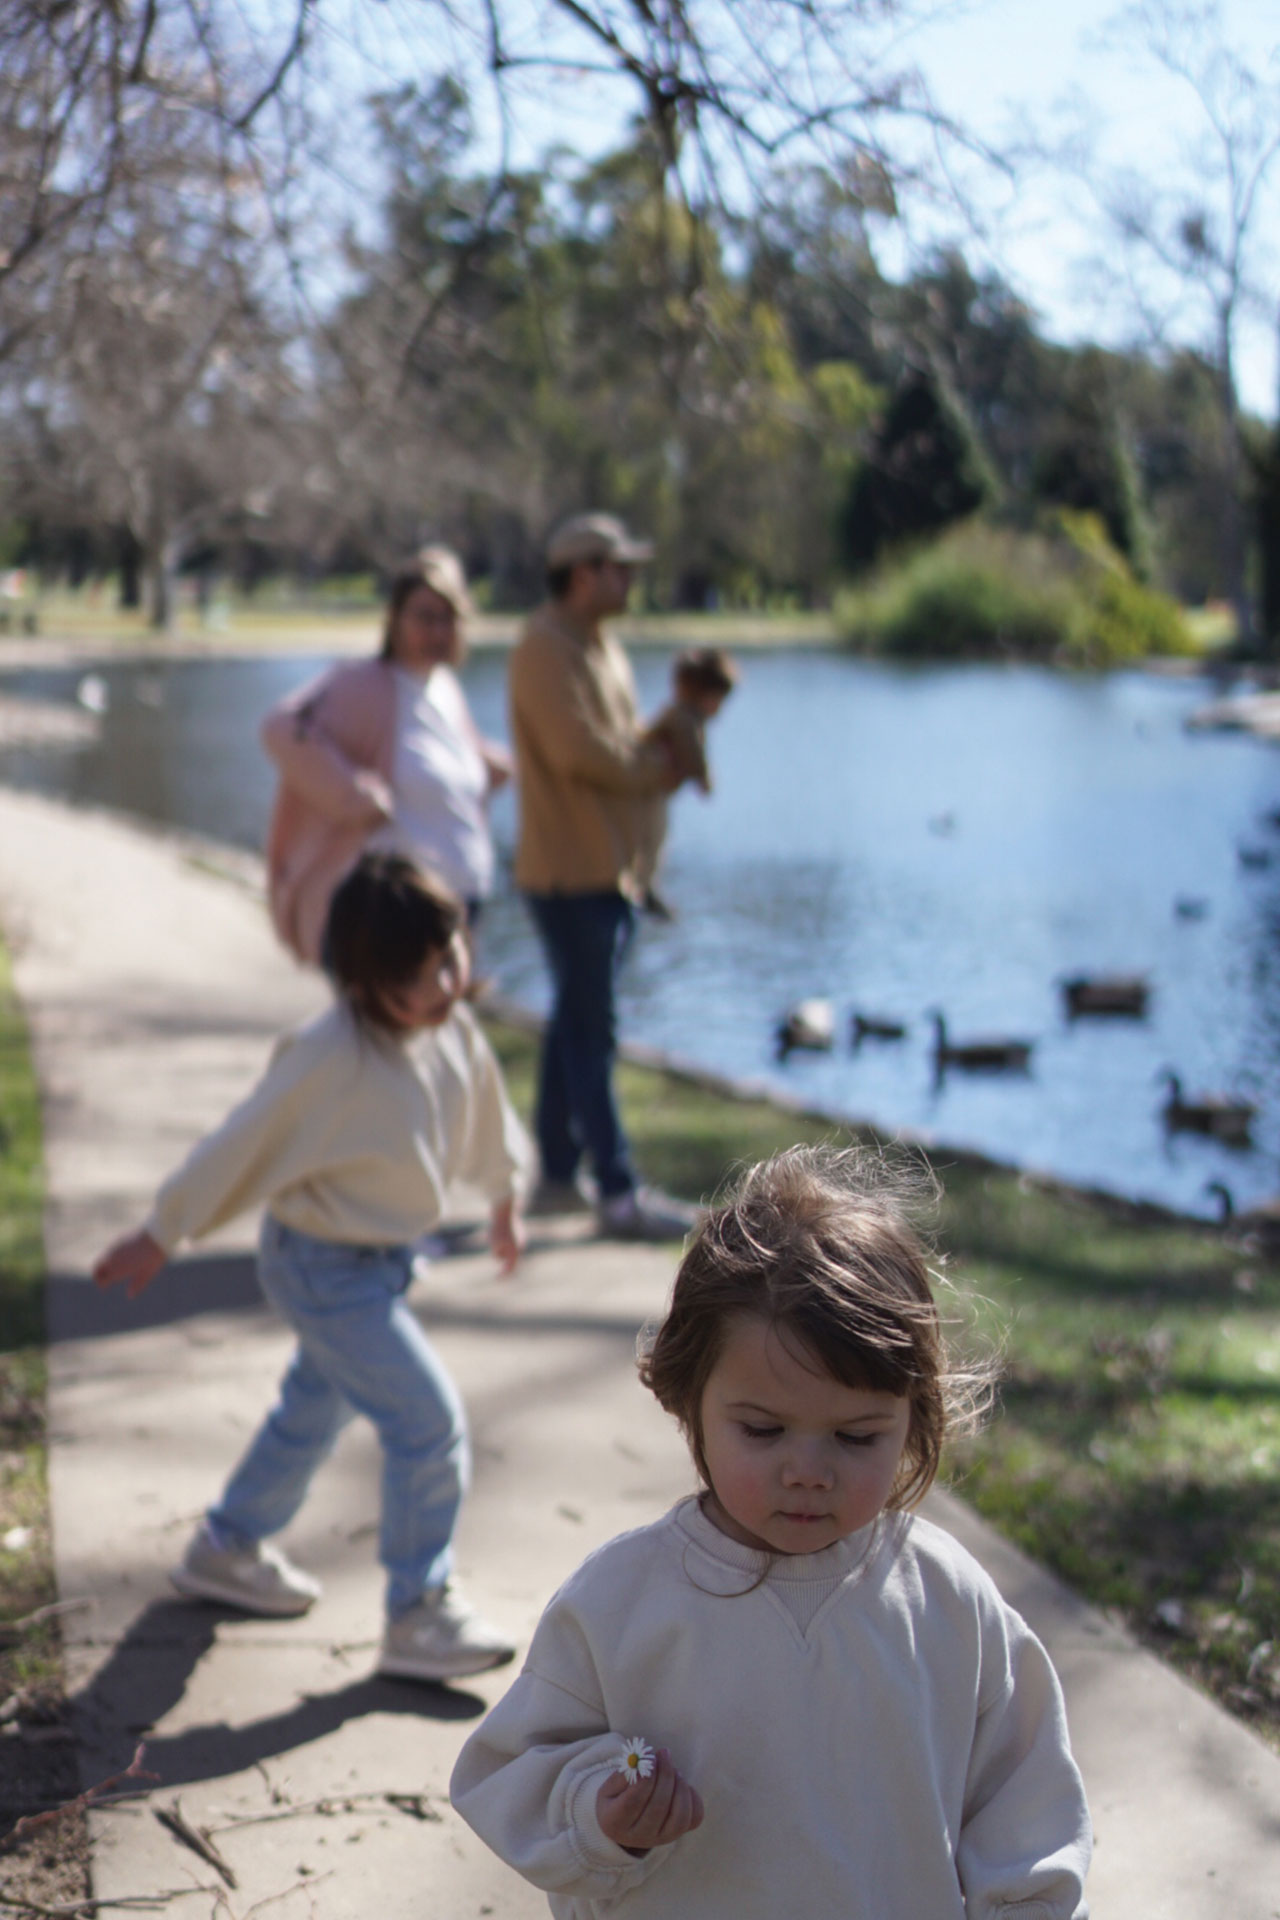 Photograph of Family at the Park Feeding Ducks at a Pond Before Preset